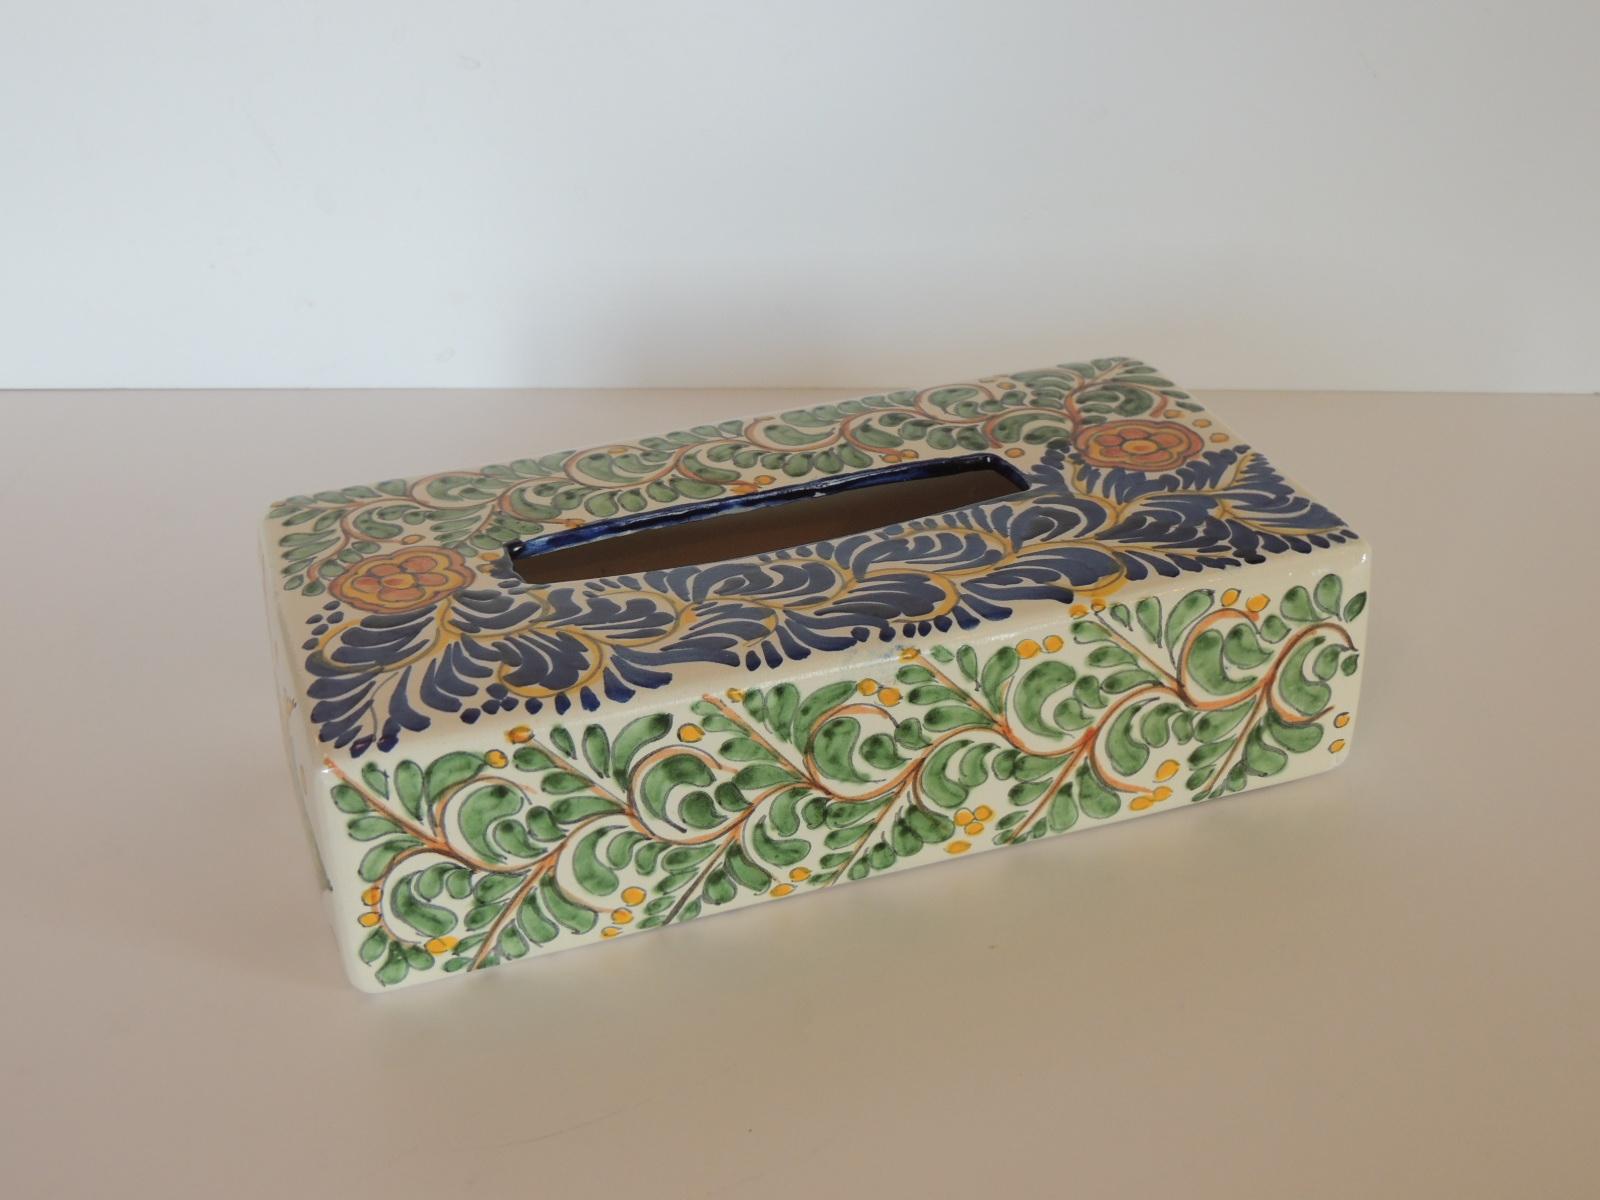 Vintage hand painted Mexican ceramic tissue box cover.
Floral blue and green with orange accents long tissue holder.
(Fits a standard tissue long box)
Size: 10. 1/4